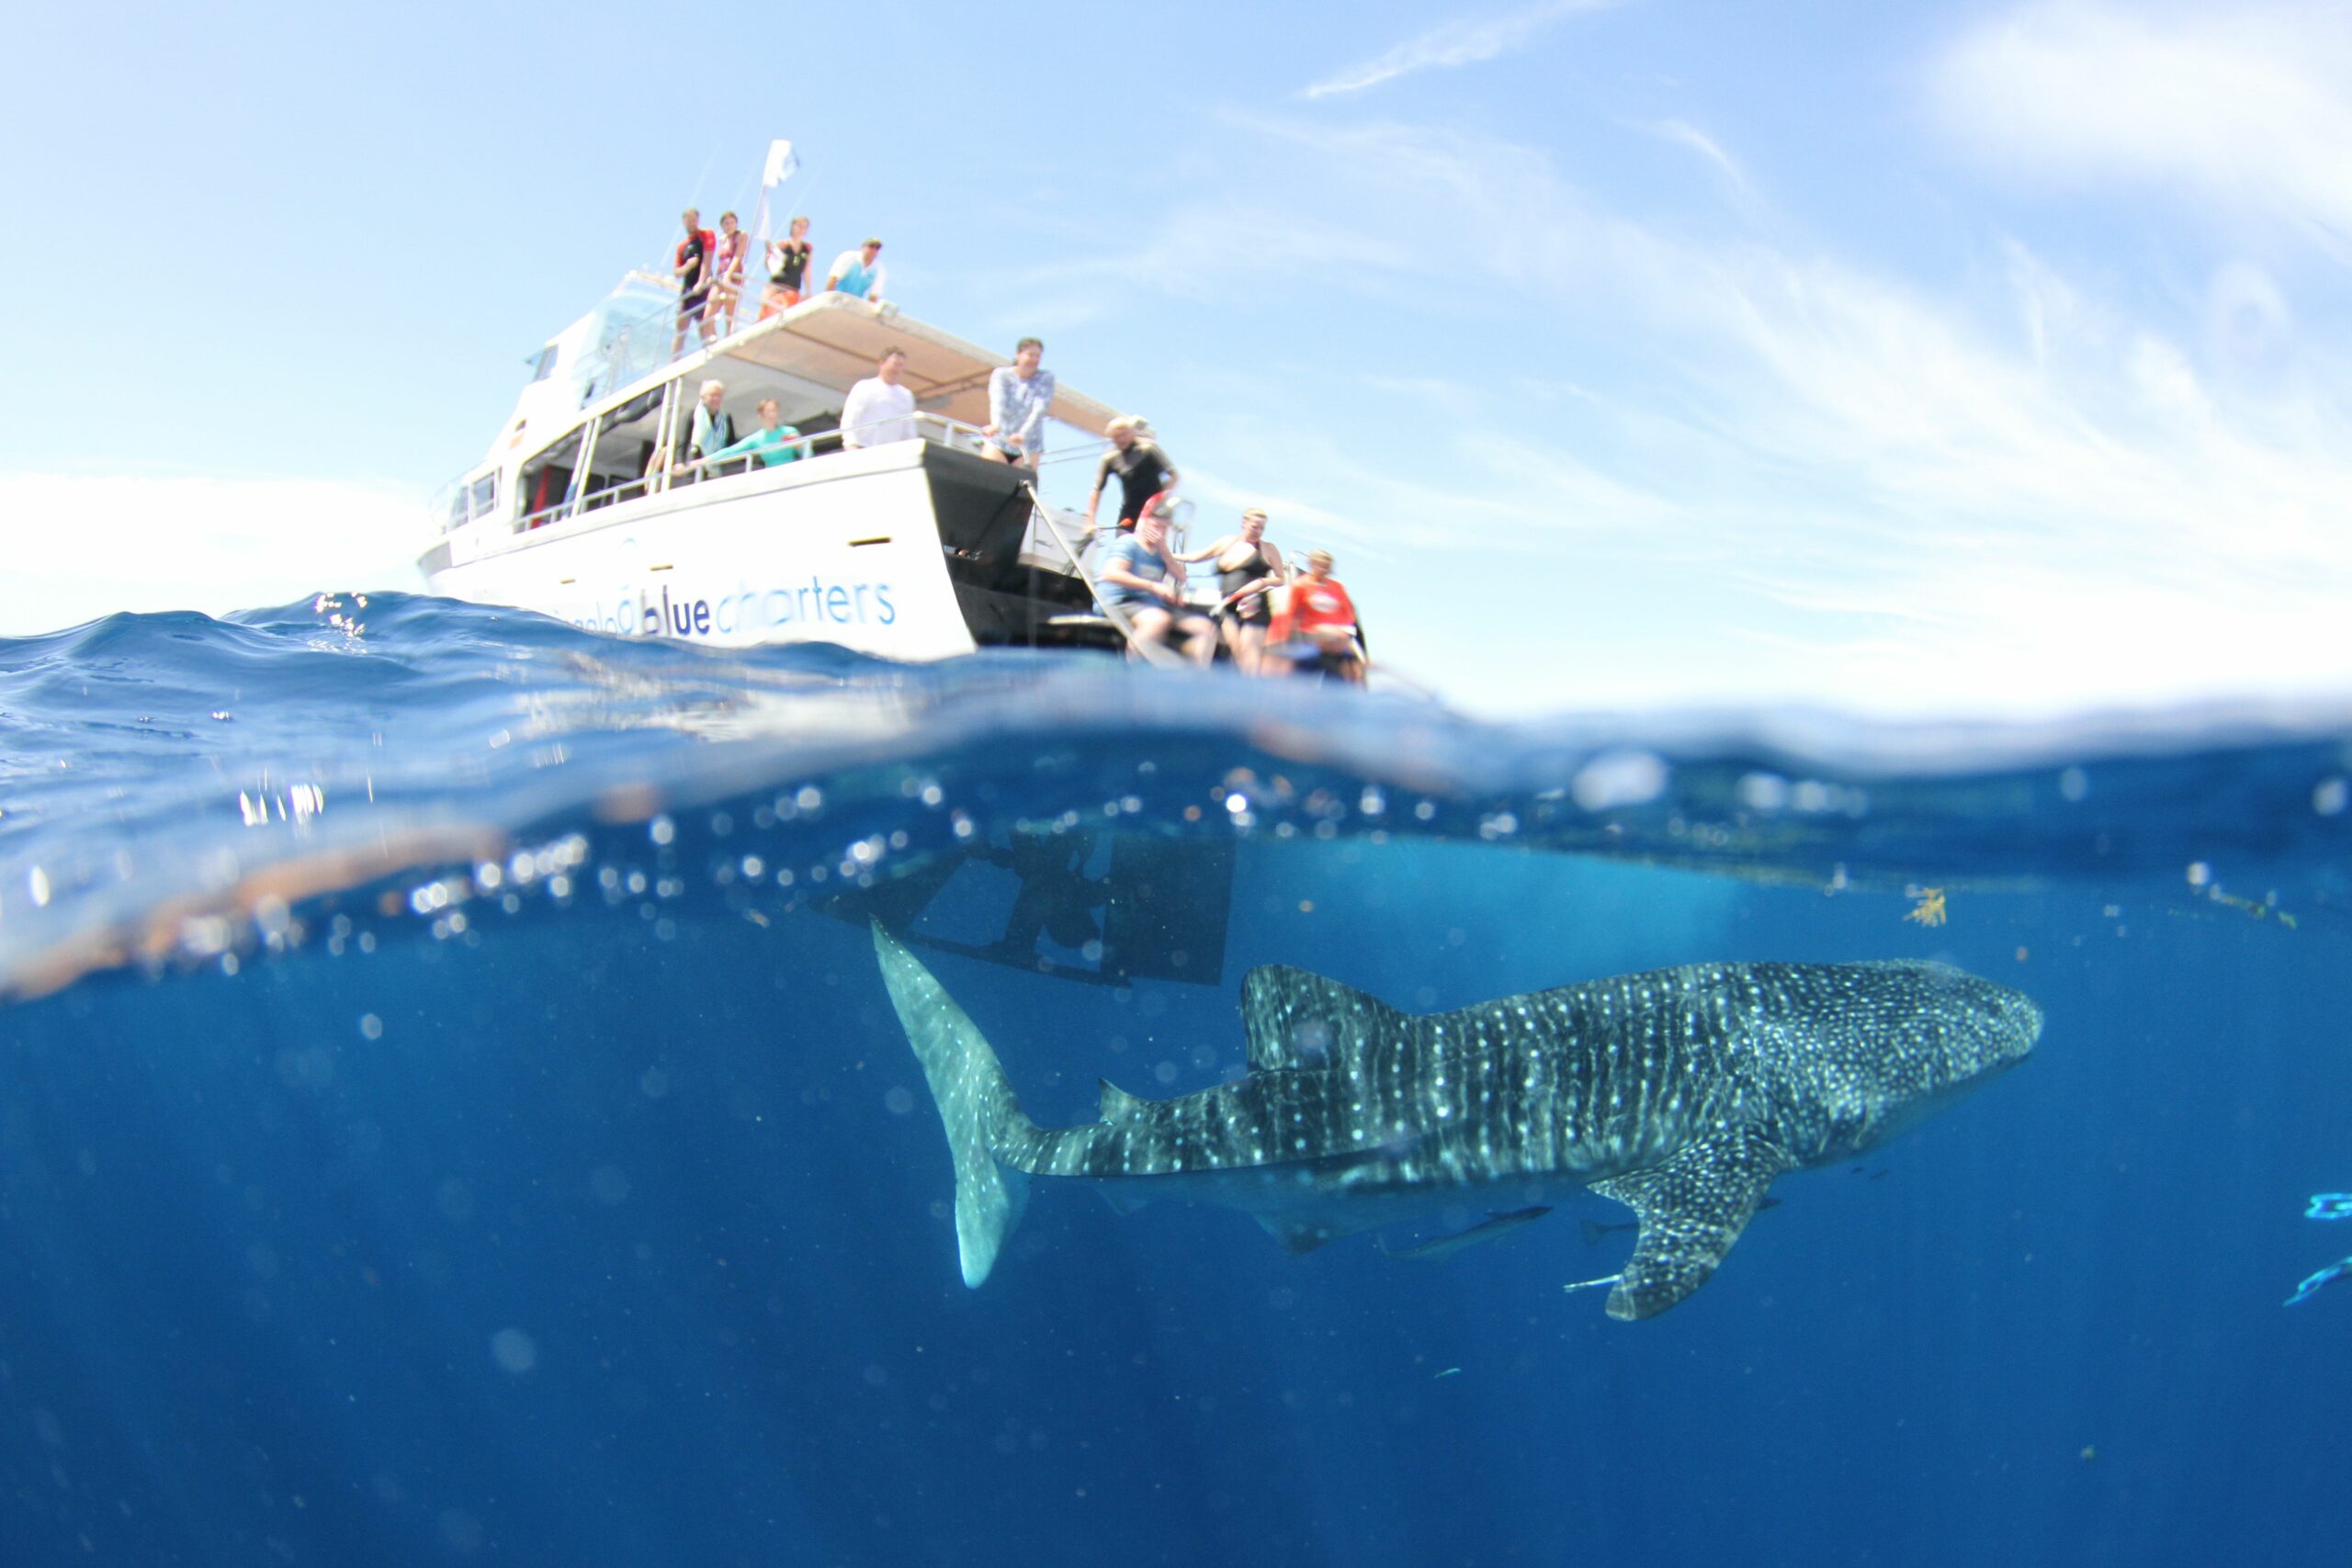 Snorkel and swim with Whale Sharks – the largest fish in the world! Or sit back and enjoy the view with a glass of Champaign from our 2 story vessel.